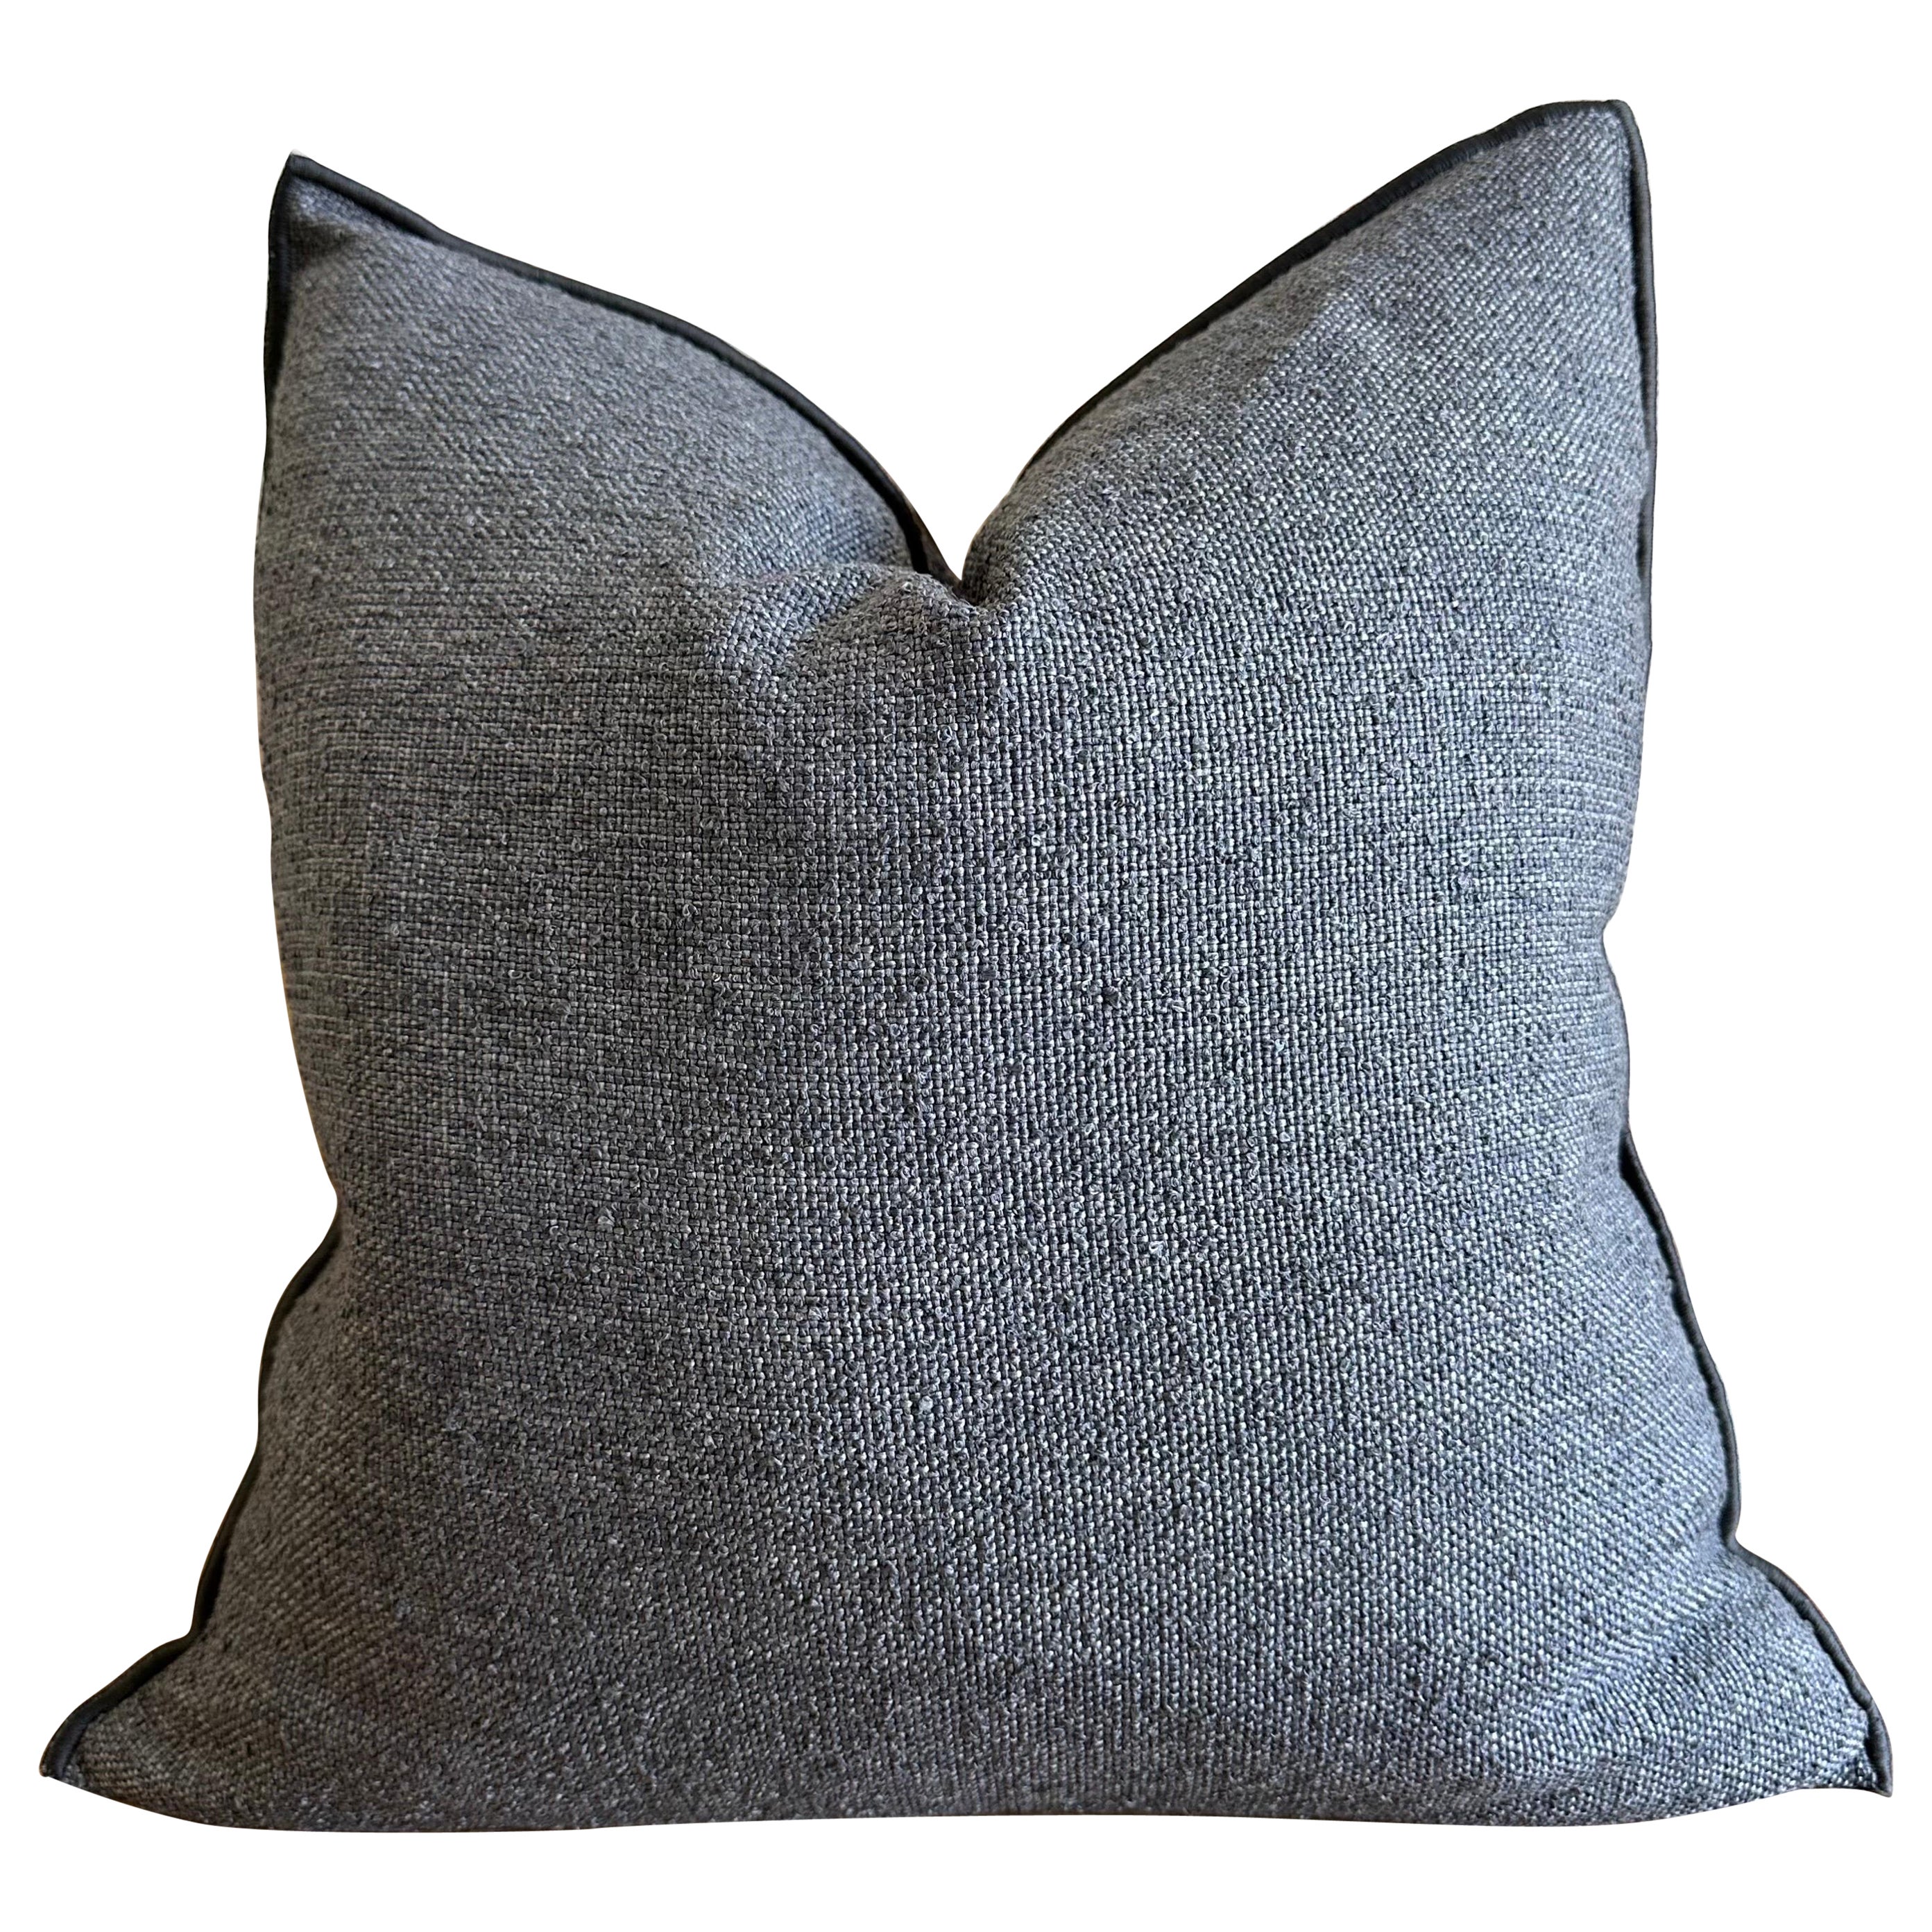  Custom Made French Outdoor Pillows in Natural Textured Outdoor Material For Sale